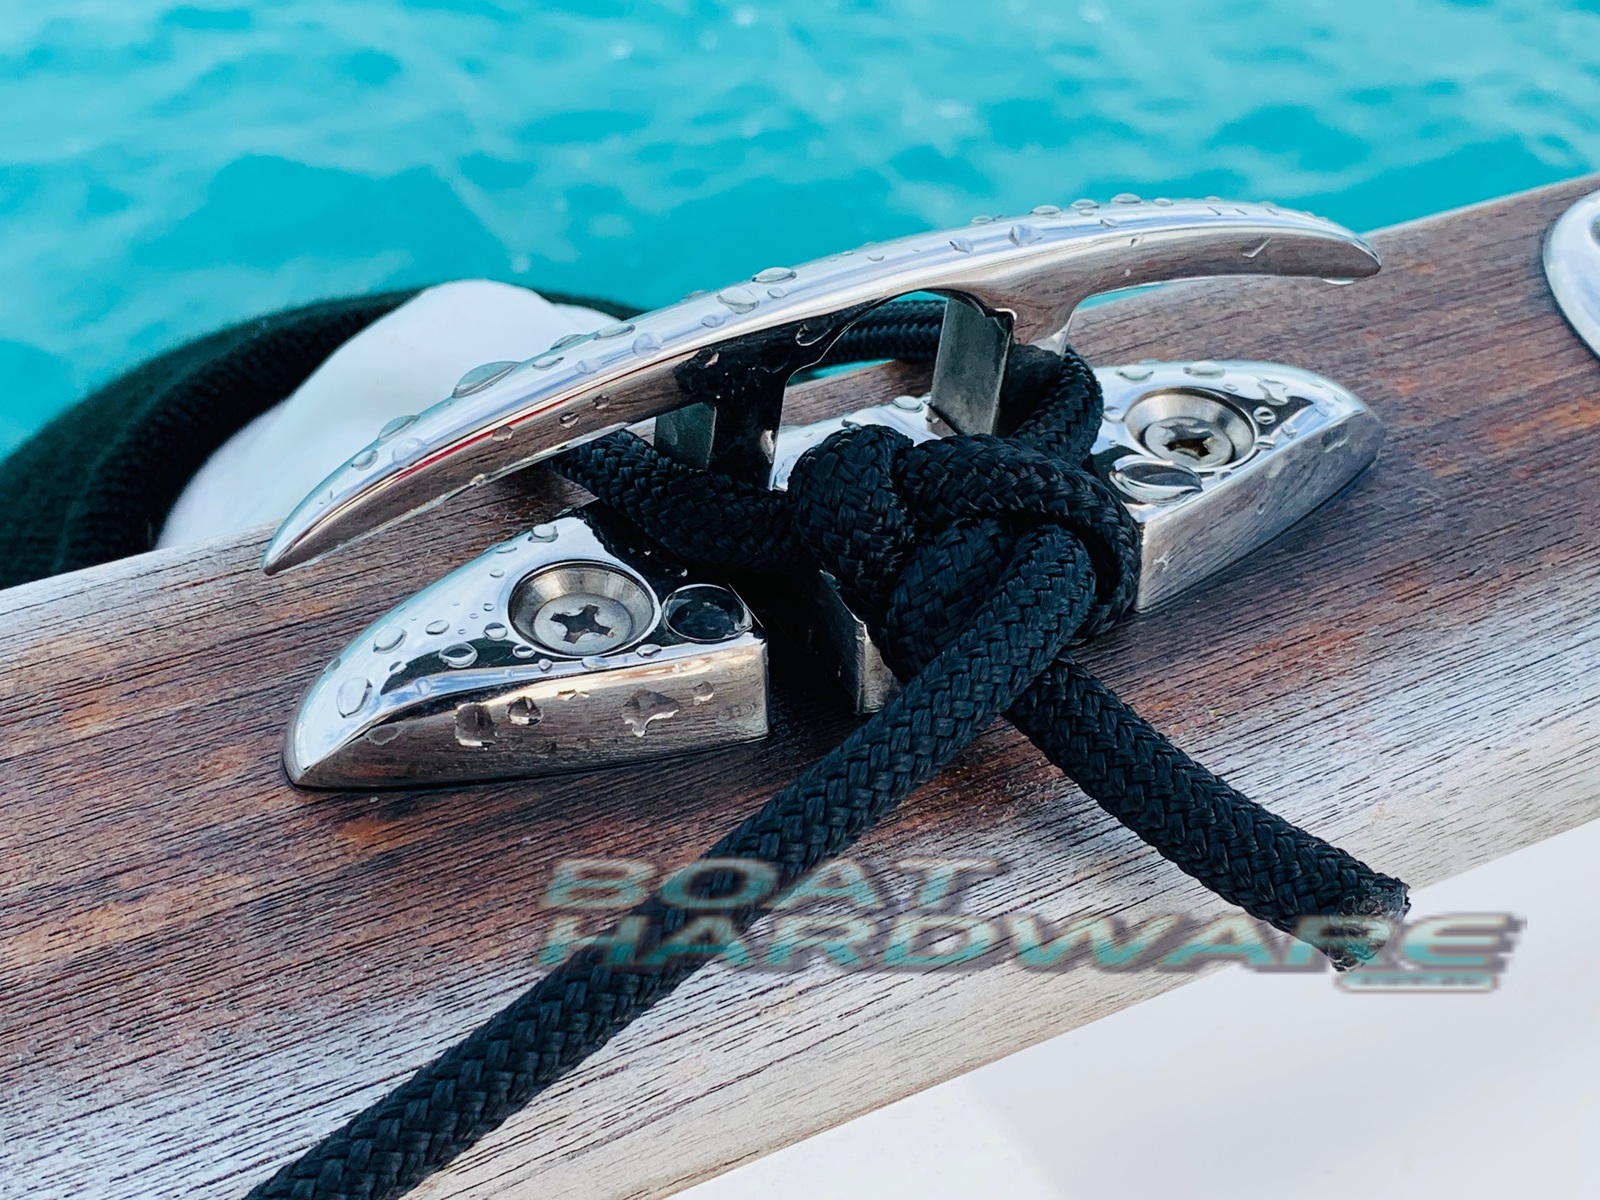 yacht rigging cleat